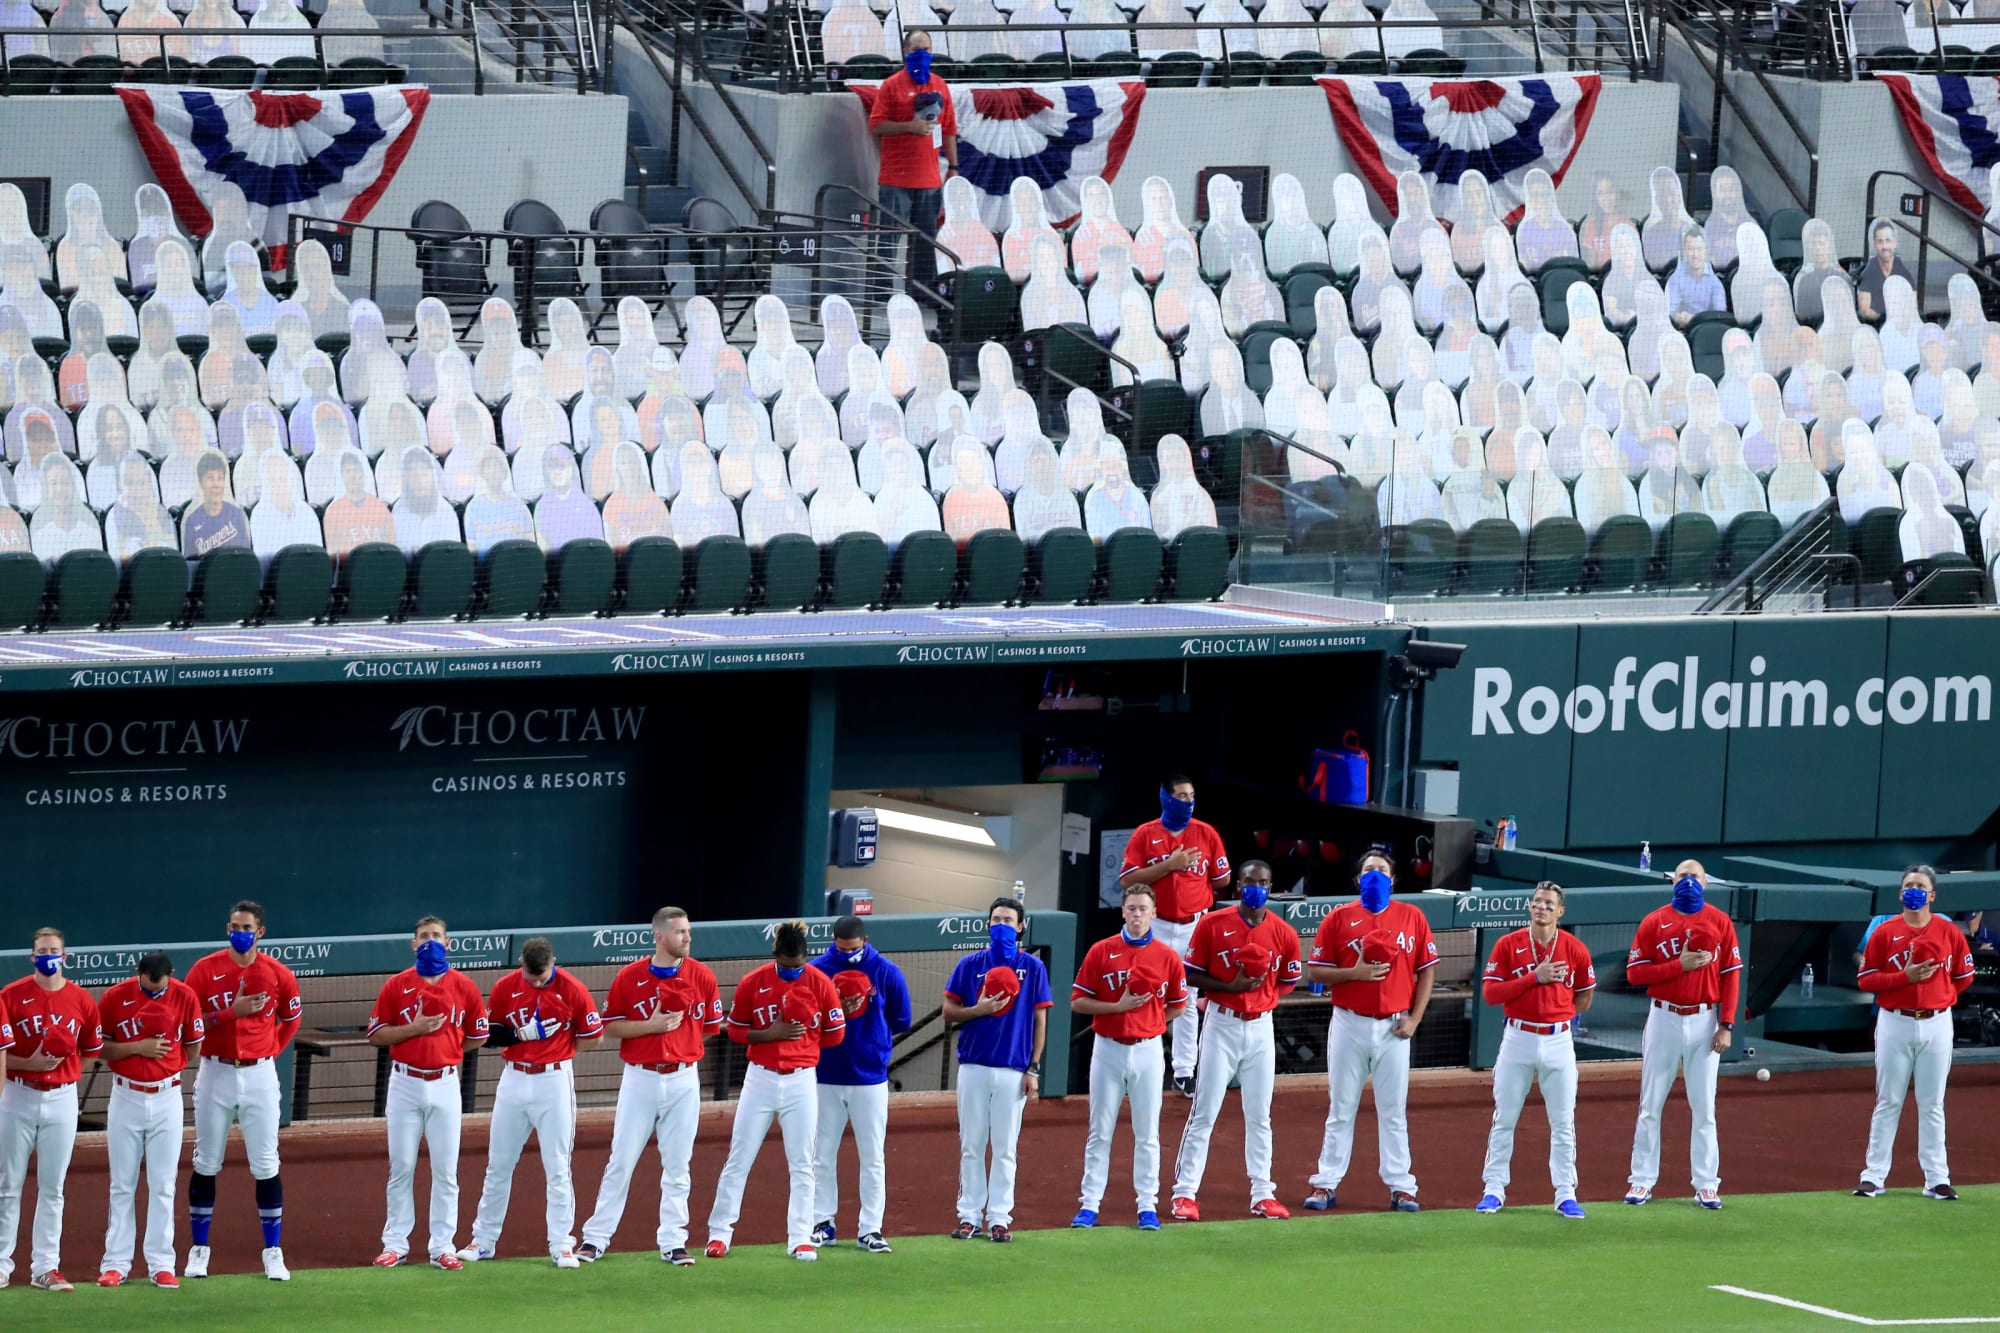 Projecting the Texas Rangers' 26man roster halfway through spring